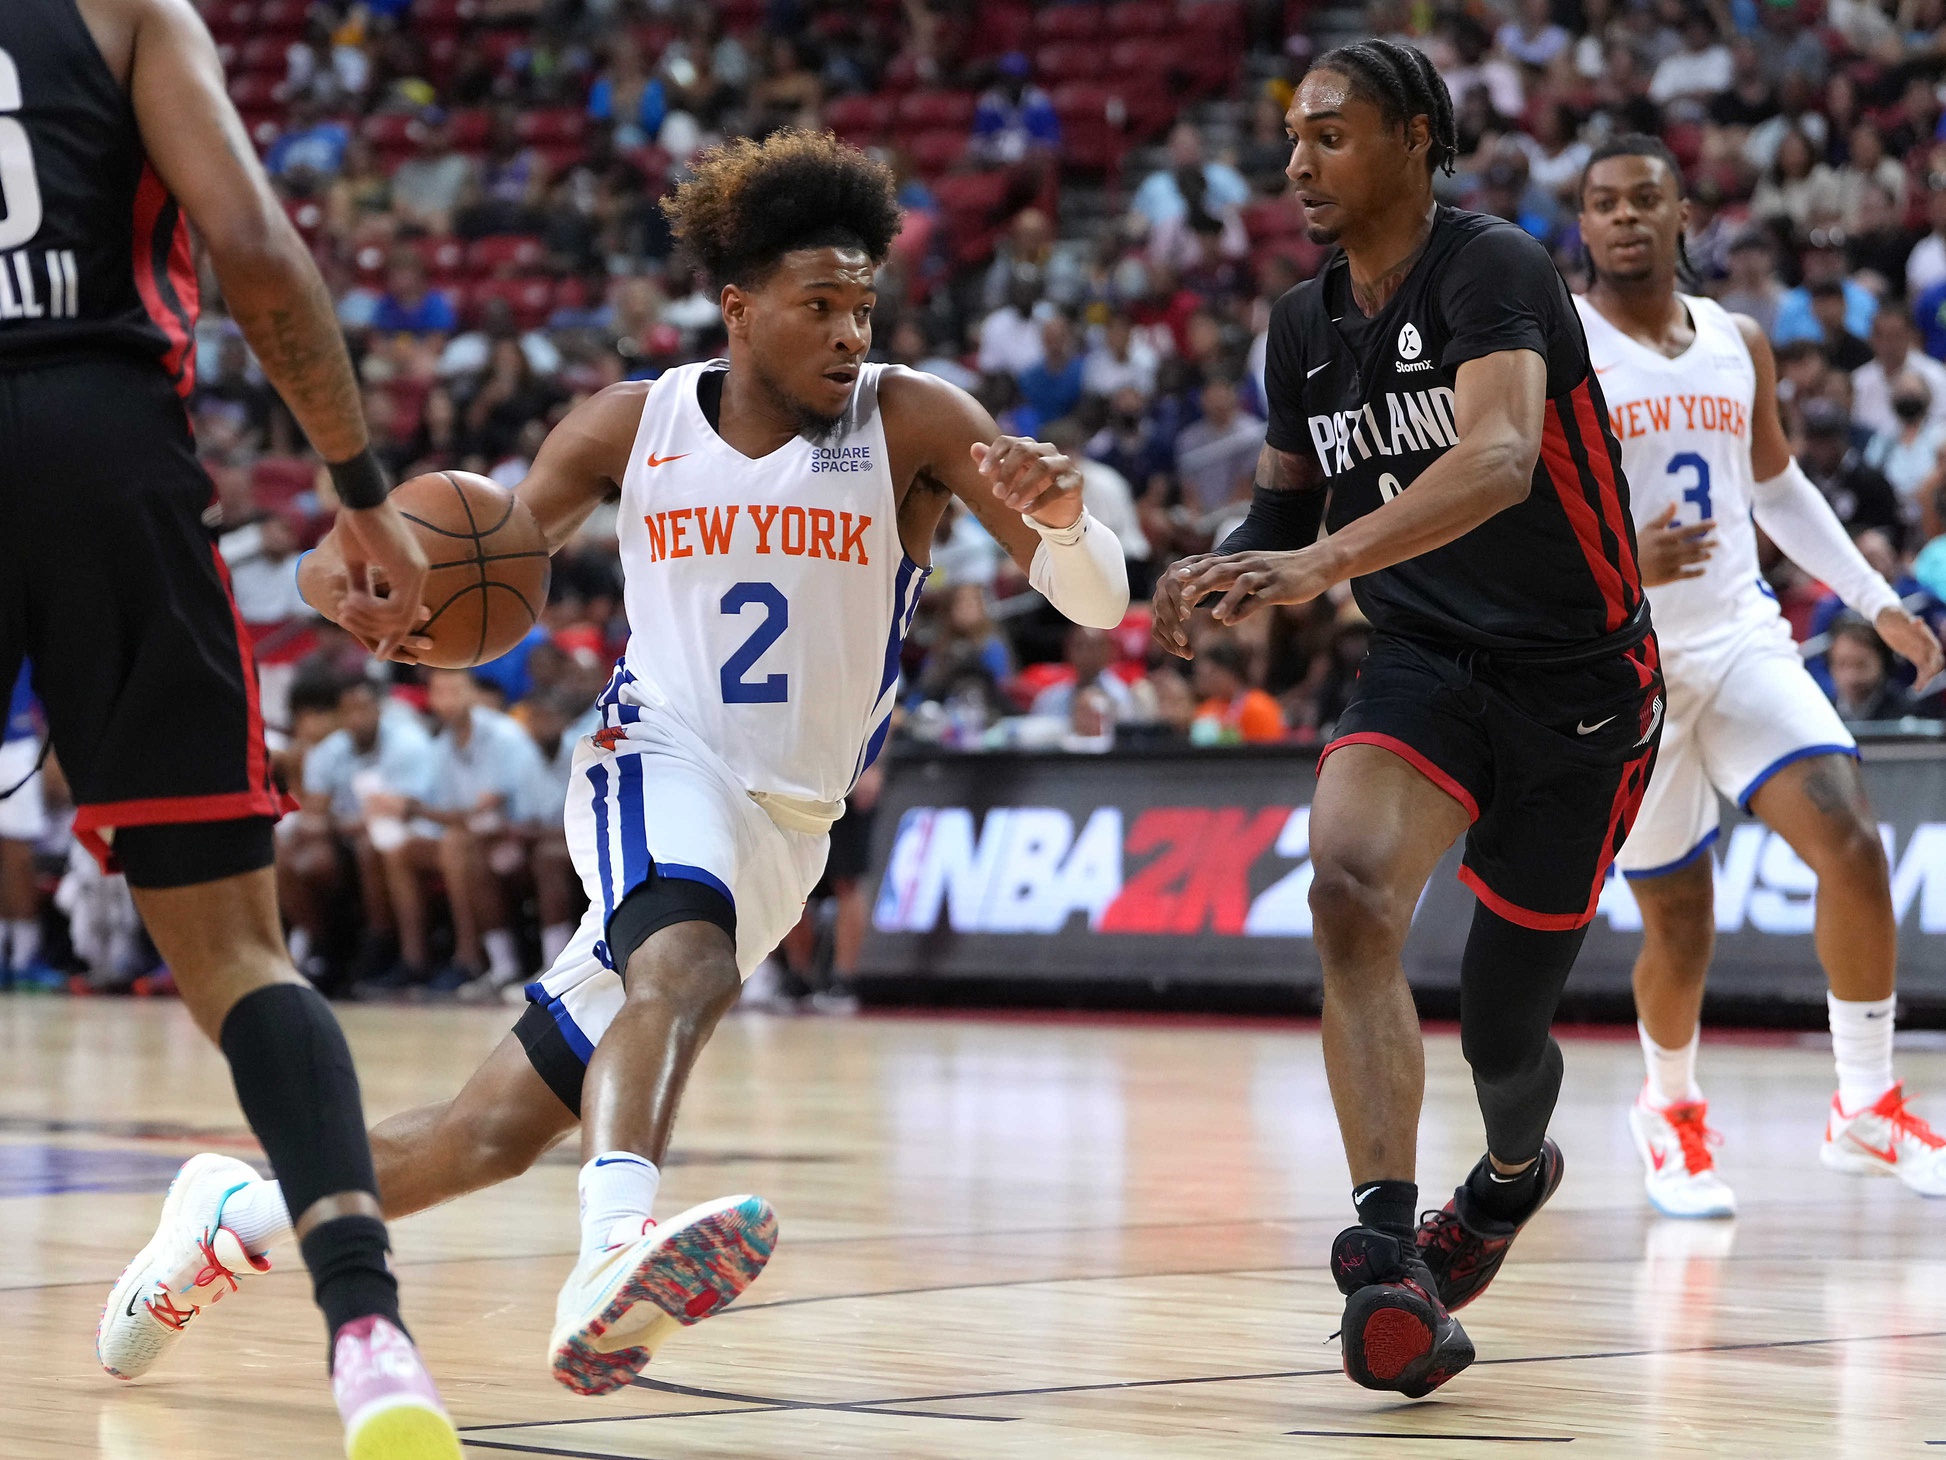 Miles McBride's Stats from the NBA Summer League Championship Sports